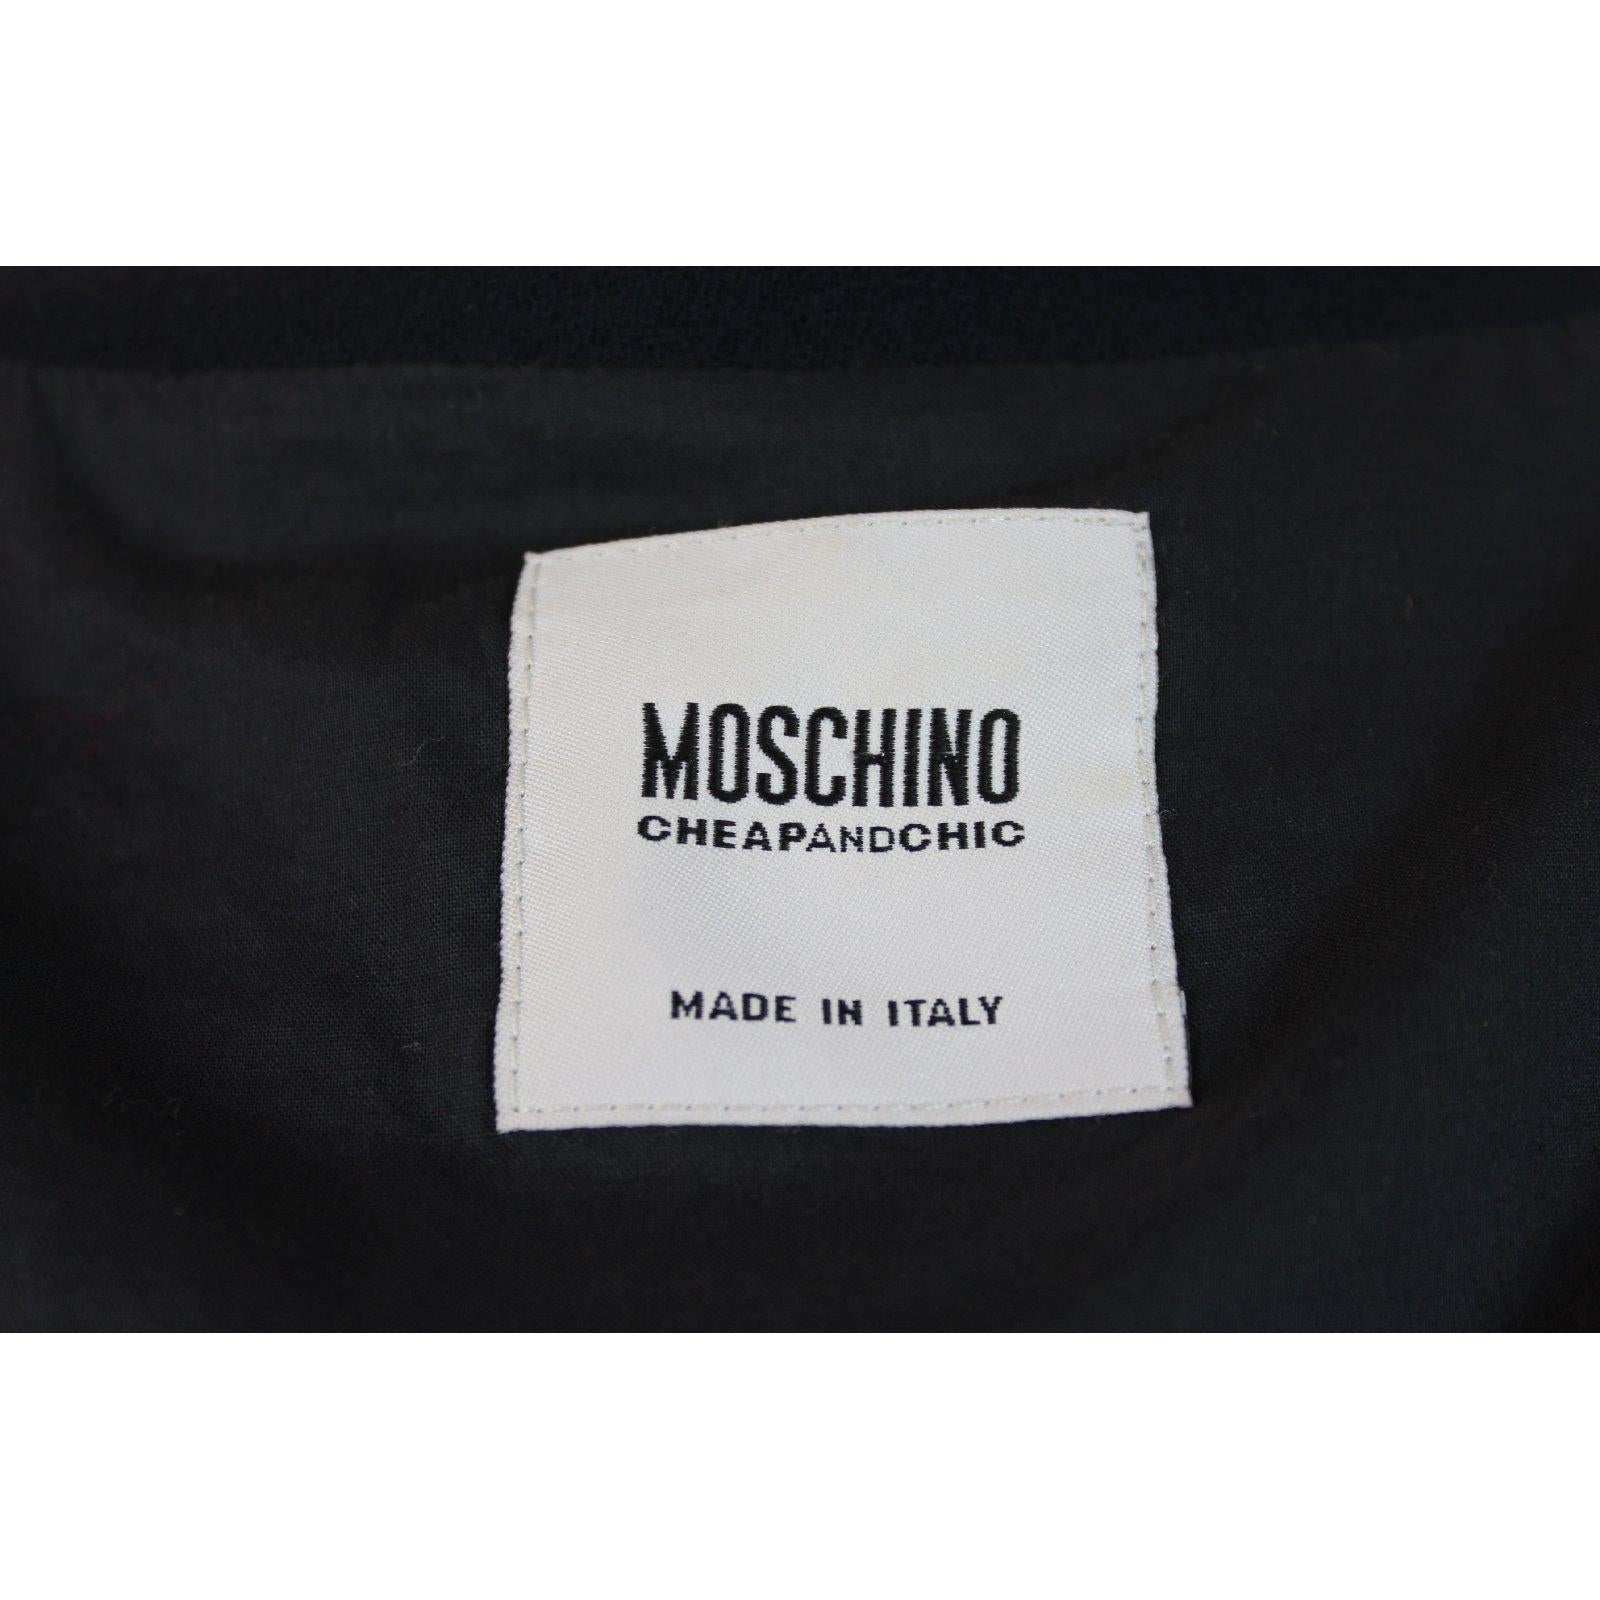 Moschino Jacket Mother Pearl Buttons Embroidered Wool Blue 1990s Rare ...